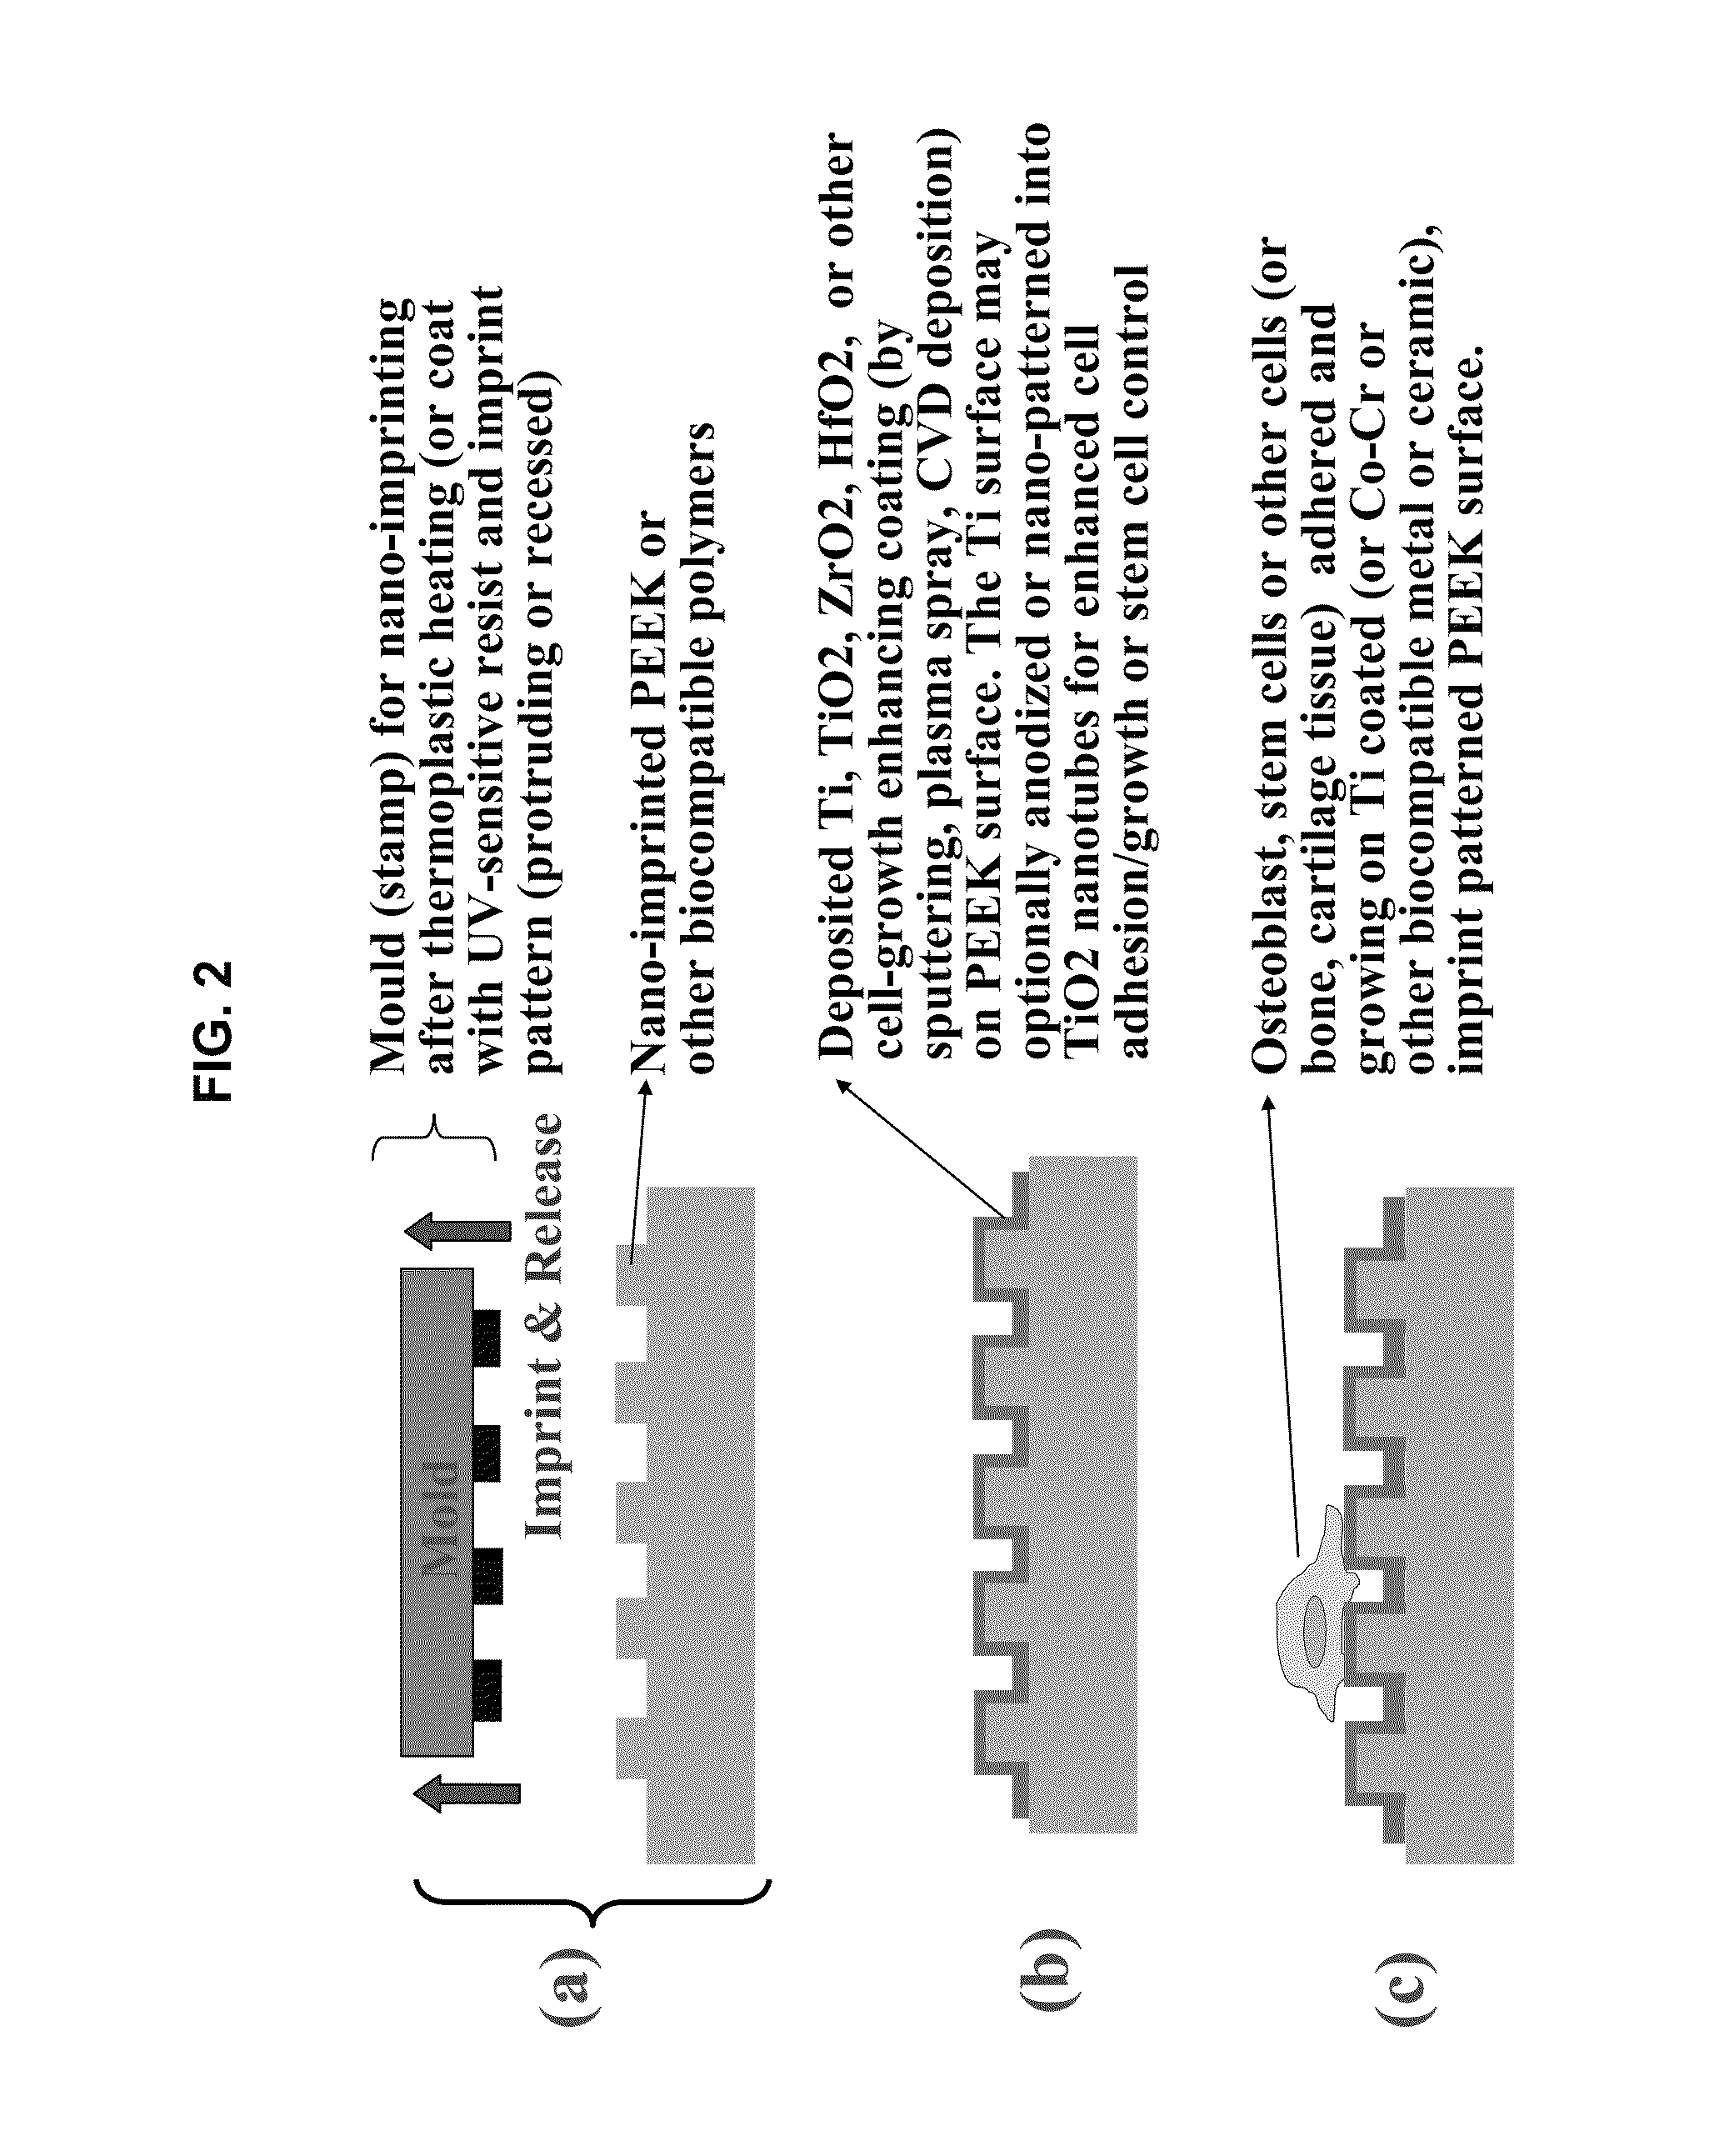 Inorganically surface-modified polymers and methods for making and using them